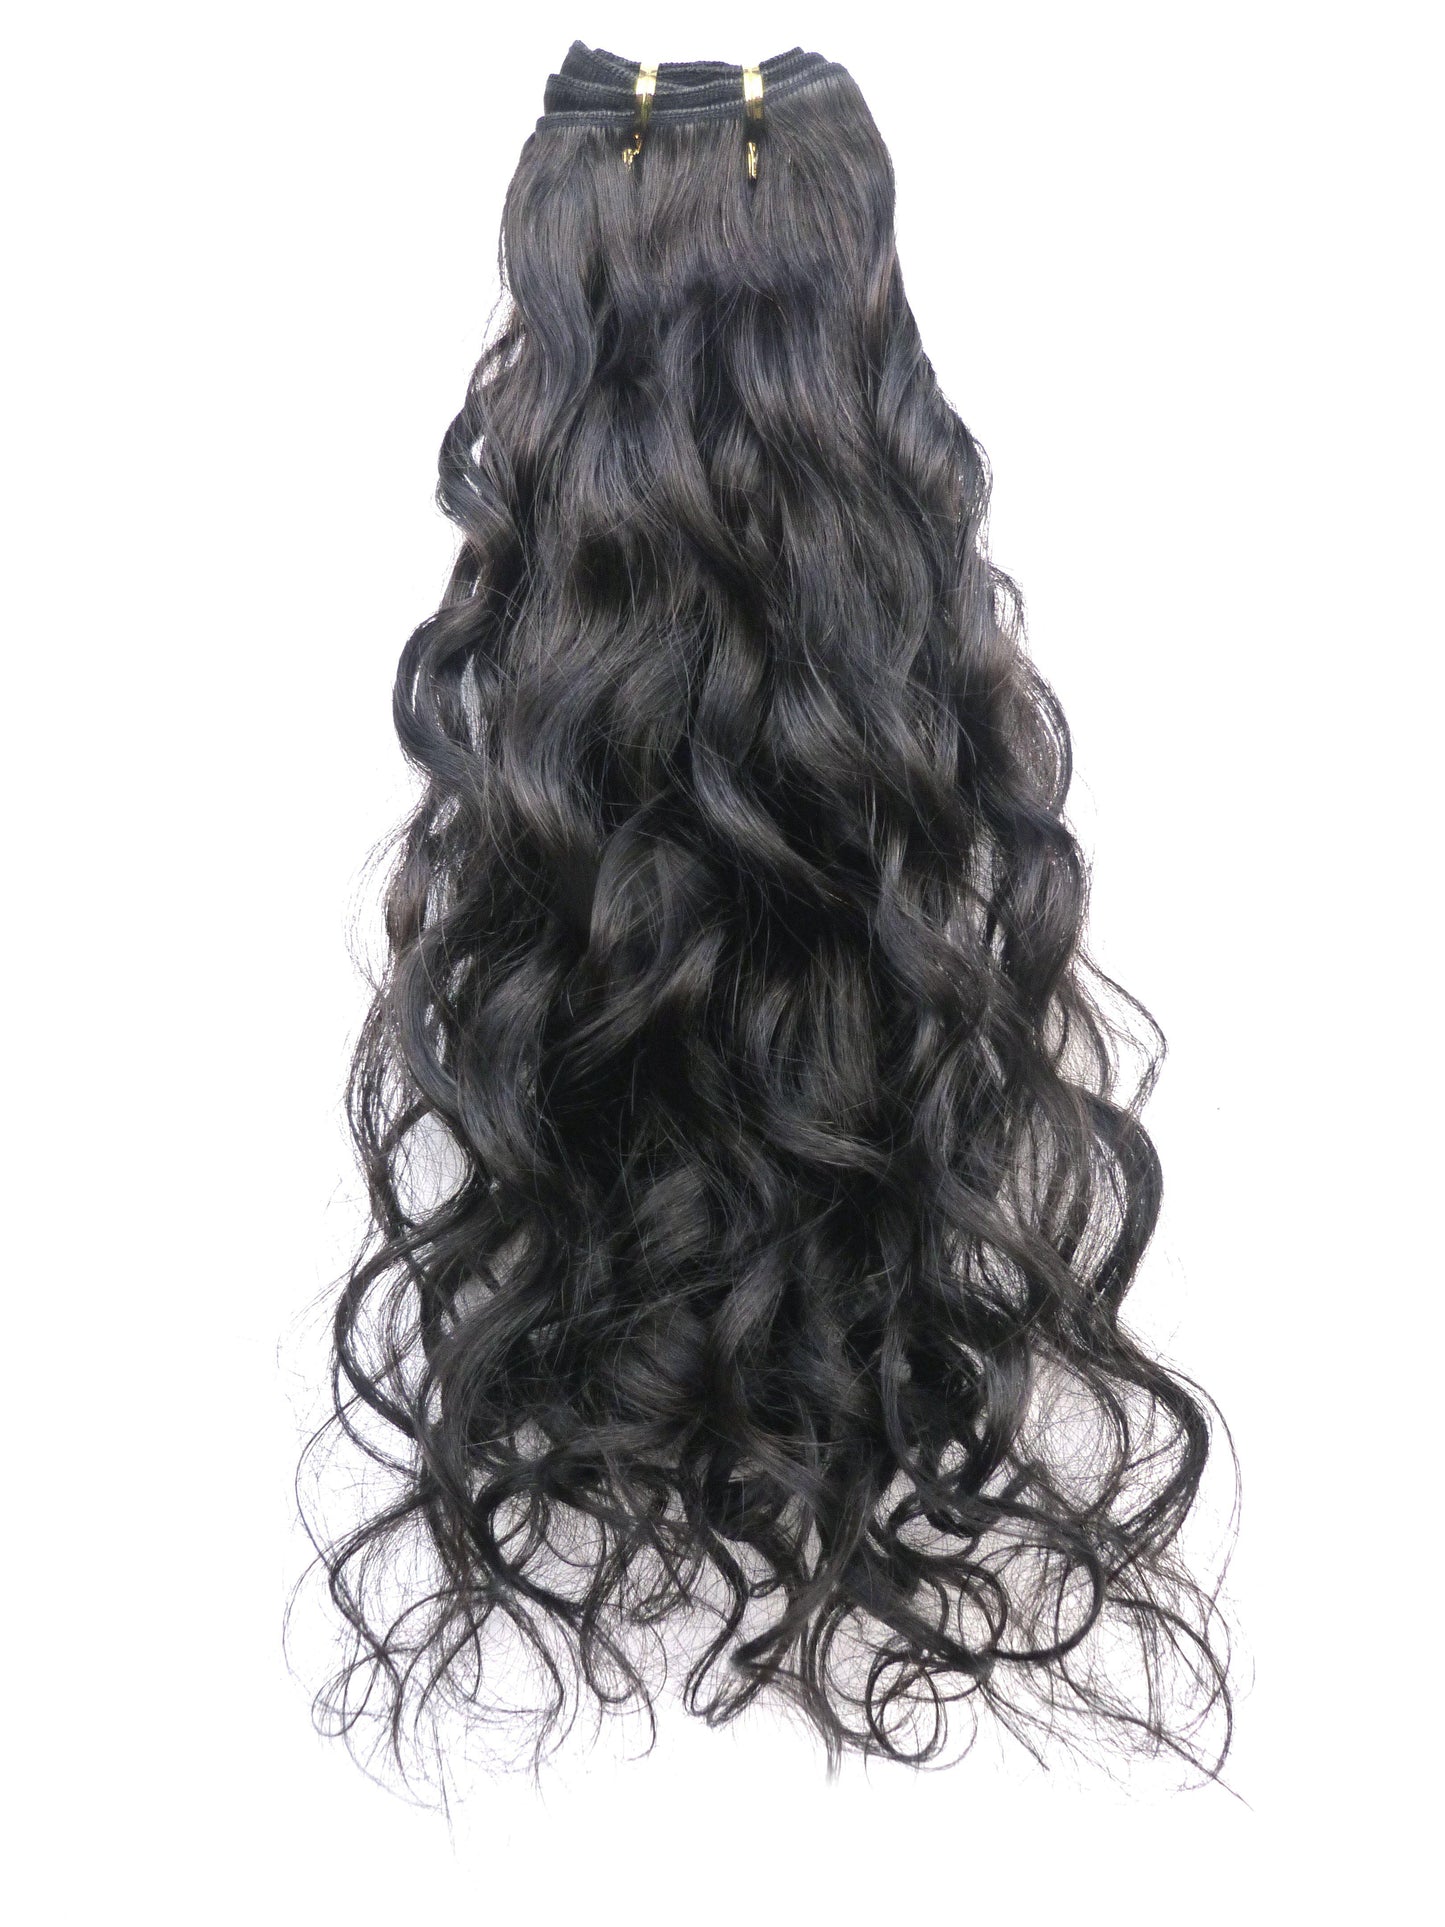 Curly Virgin Uncoloured Brazilian Remy Human Hair Wefts - Quick Shipping!-Virgin Hair & Beauty, The Best Hair Extensions, Real Virgin Human Hair.